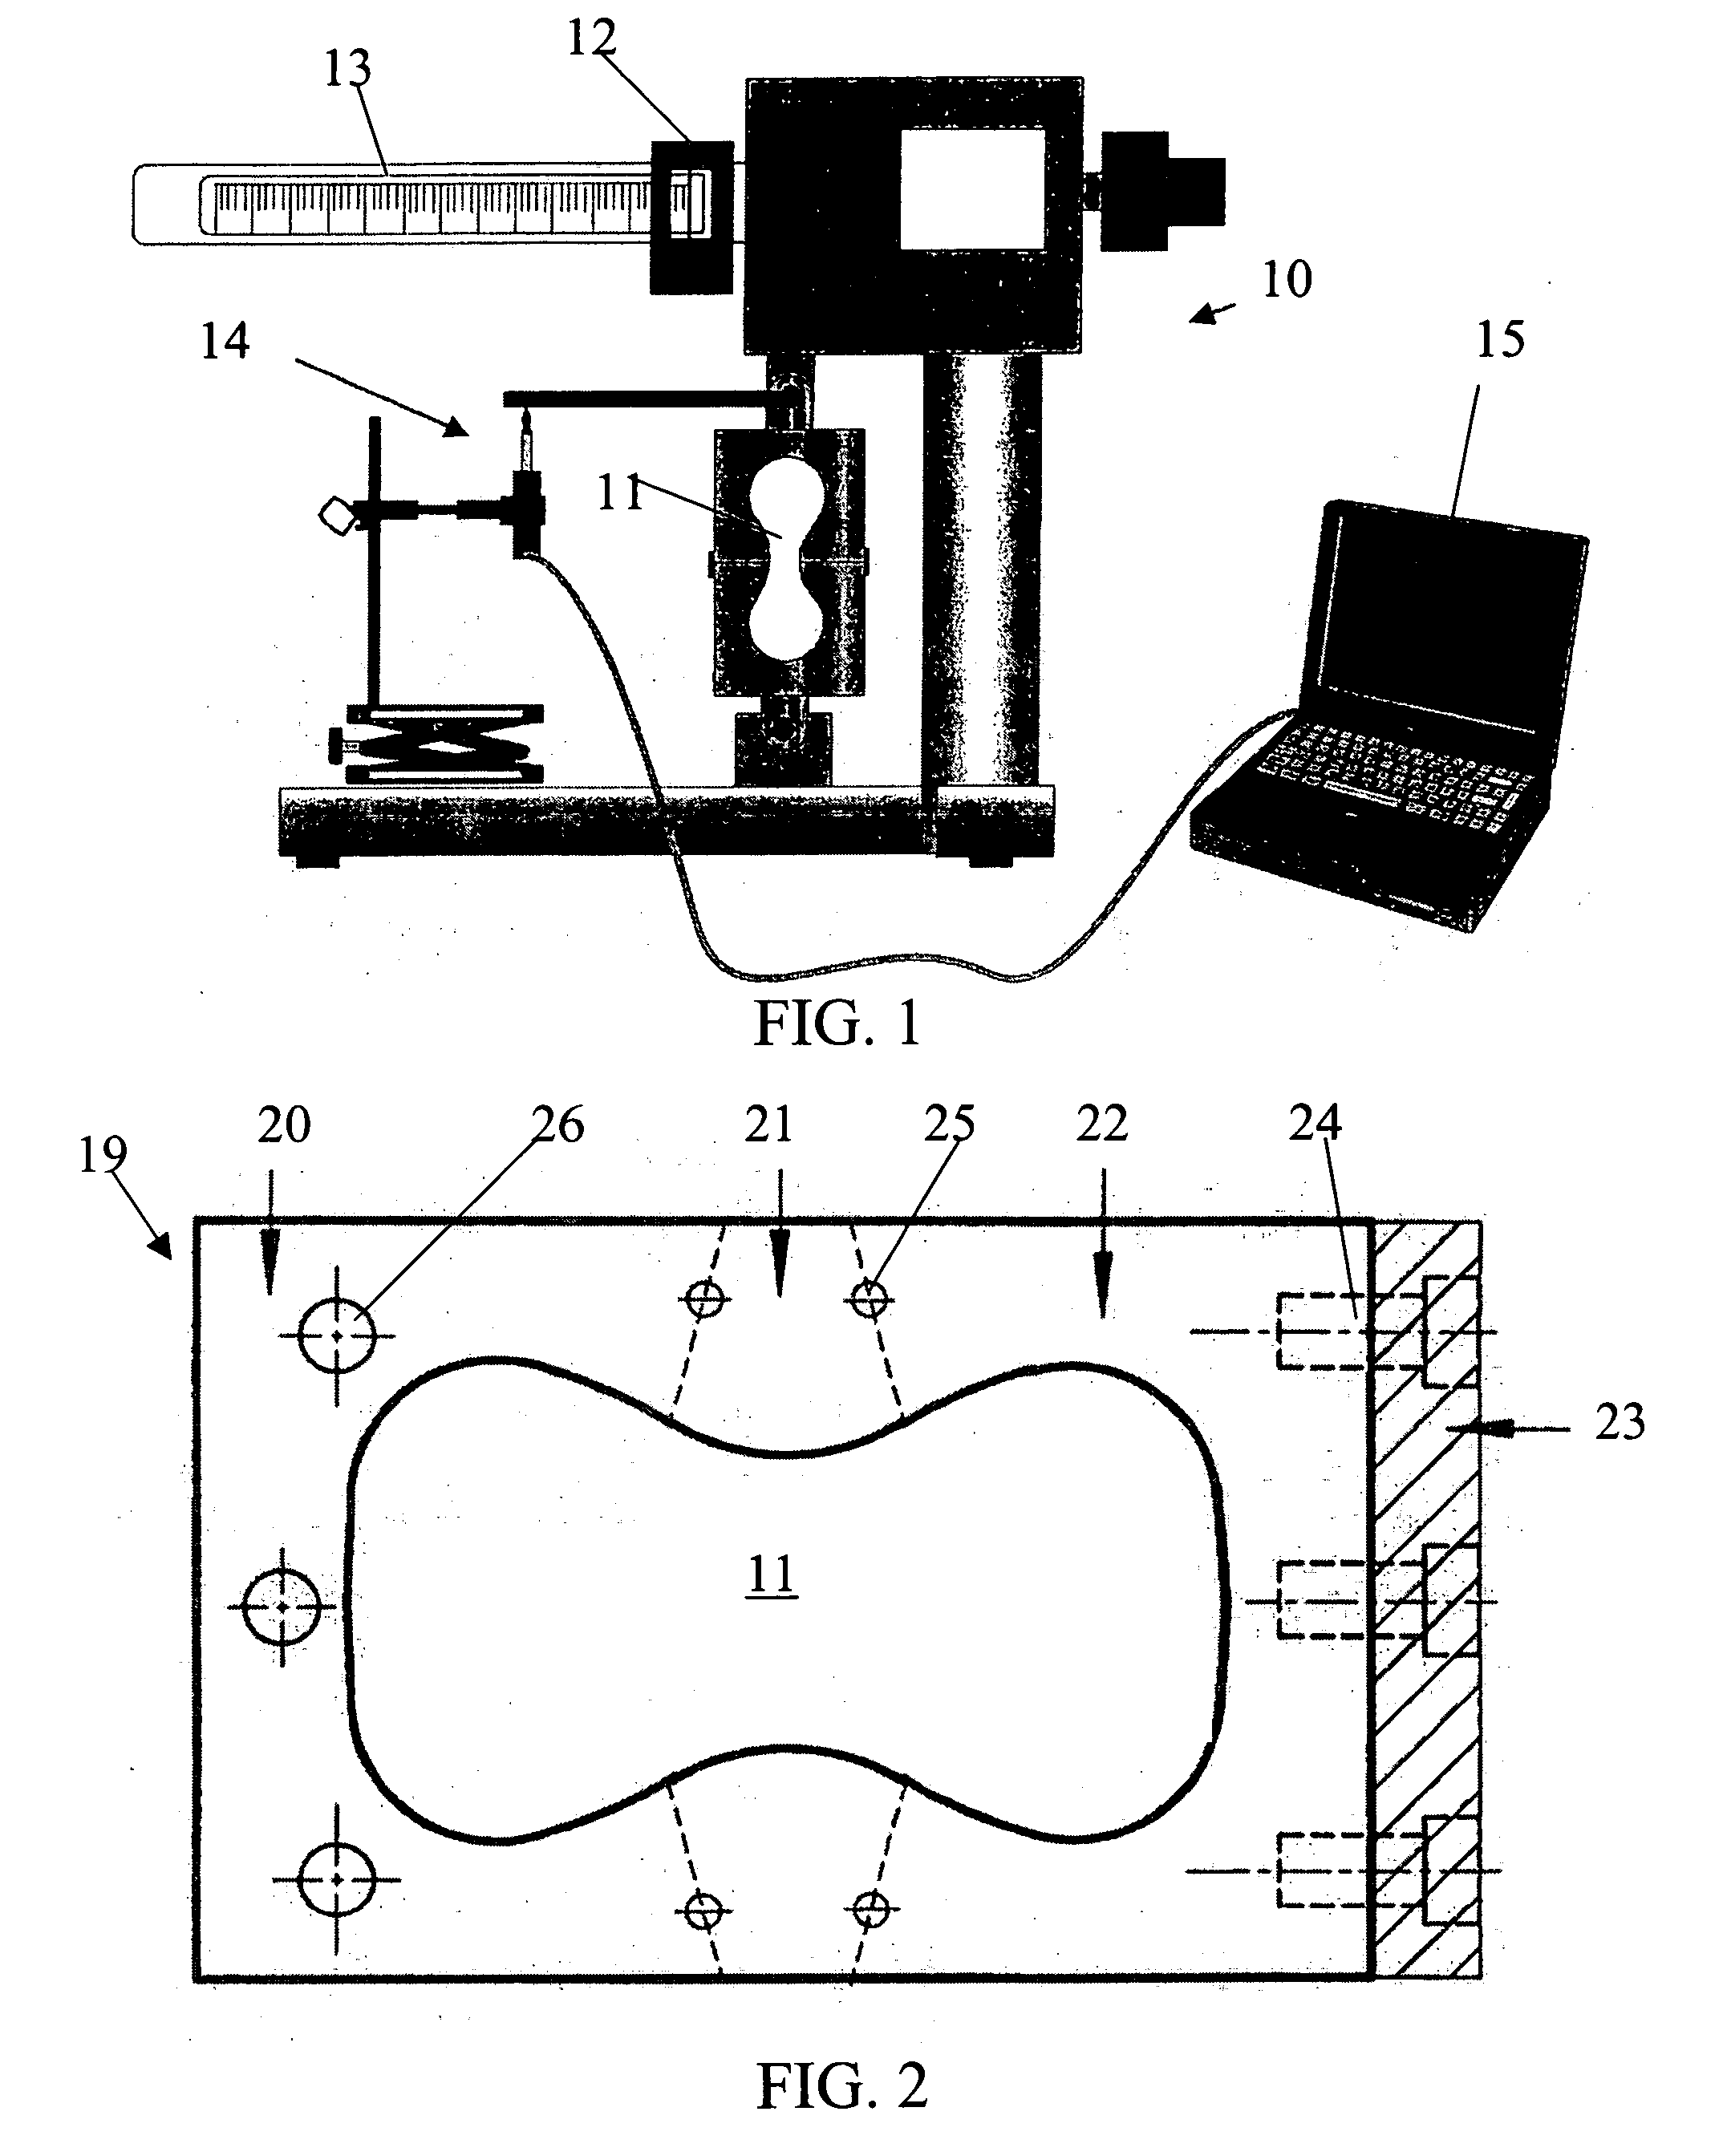 Testing apparatus and method of deriving Young's modulus from tensile stress/strain relationships